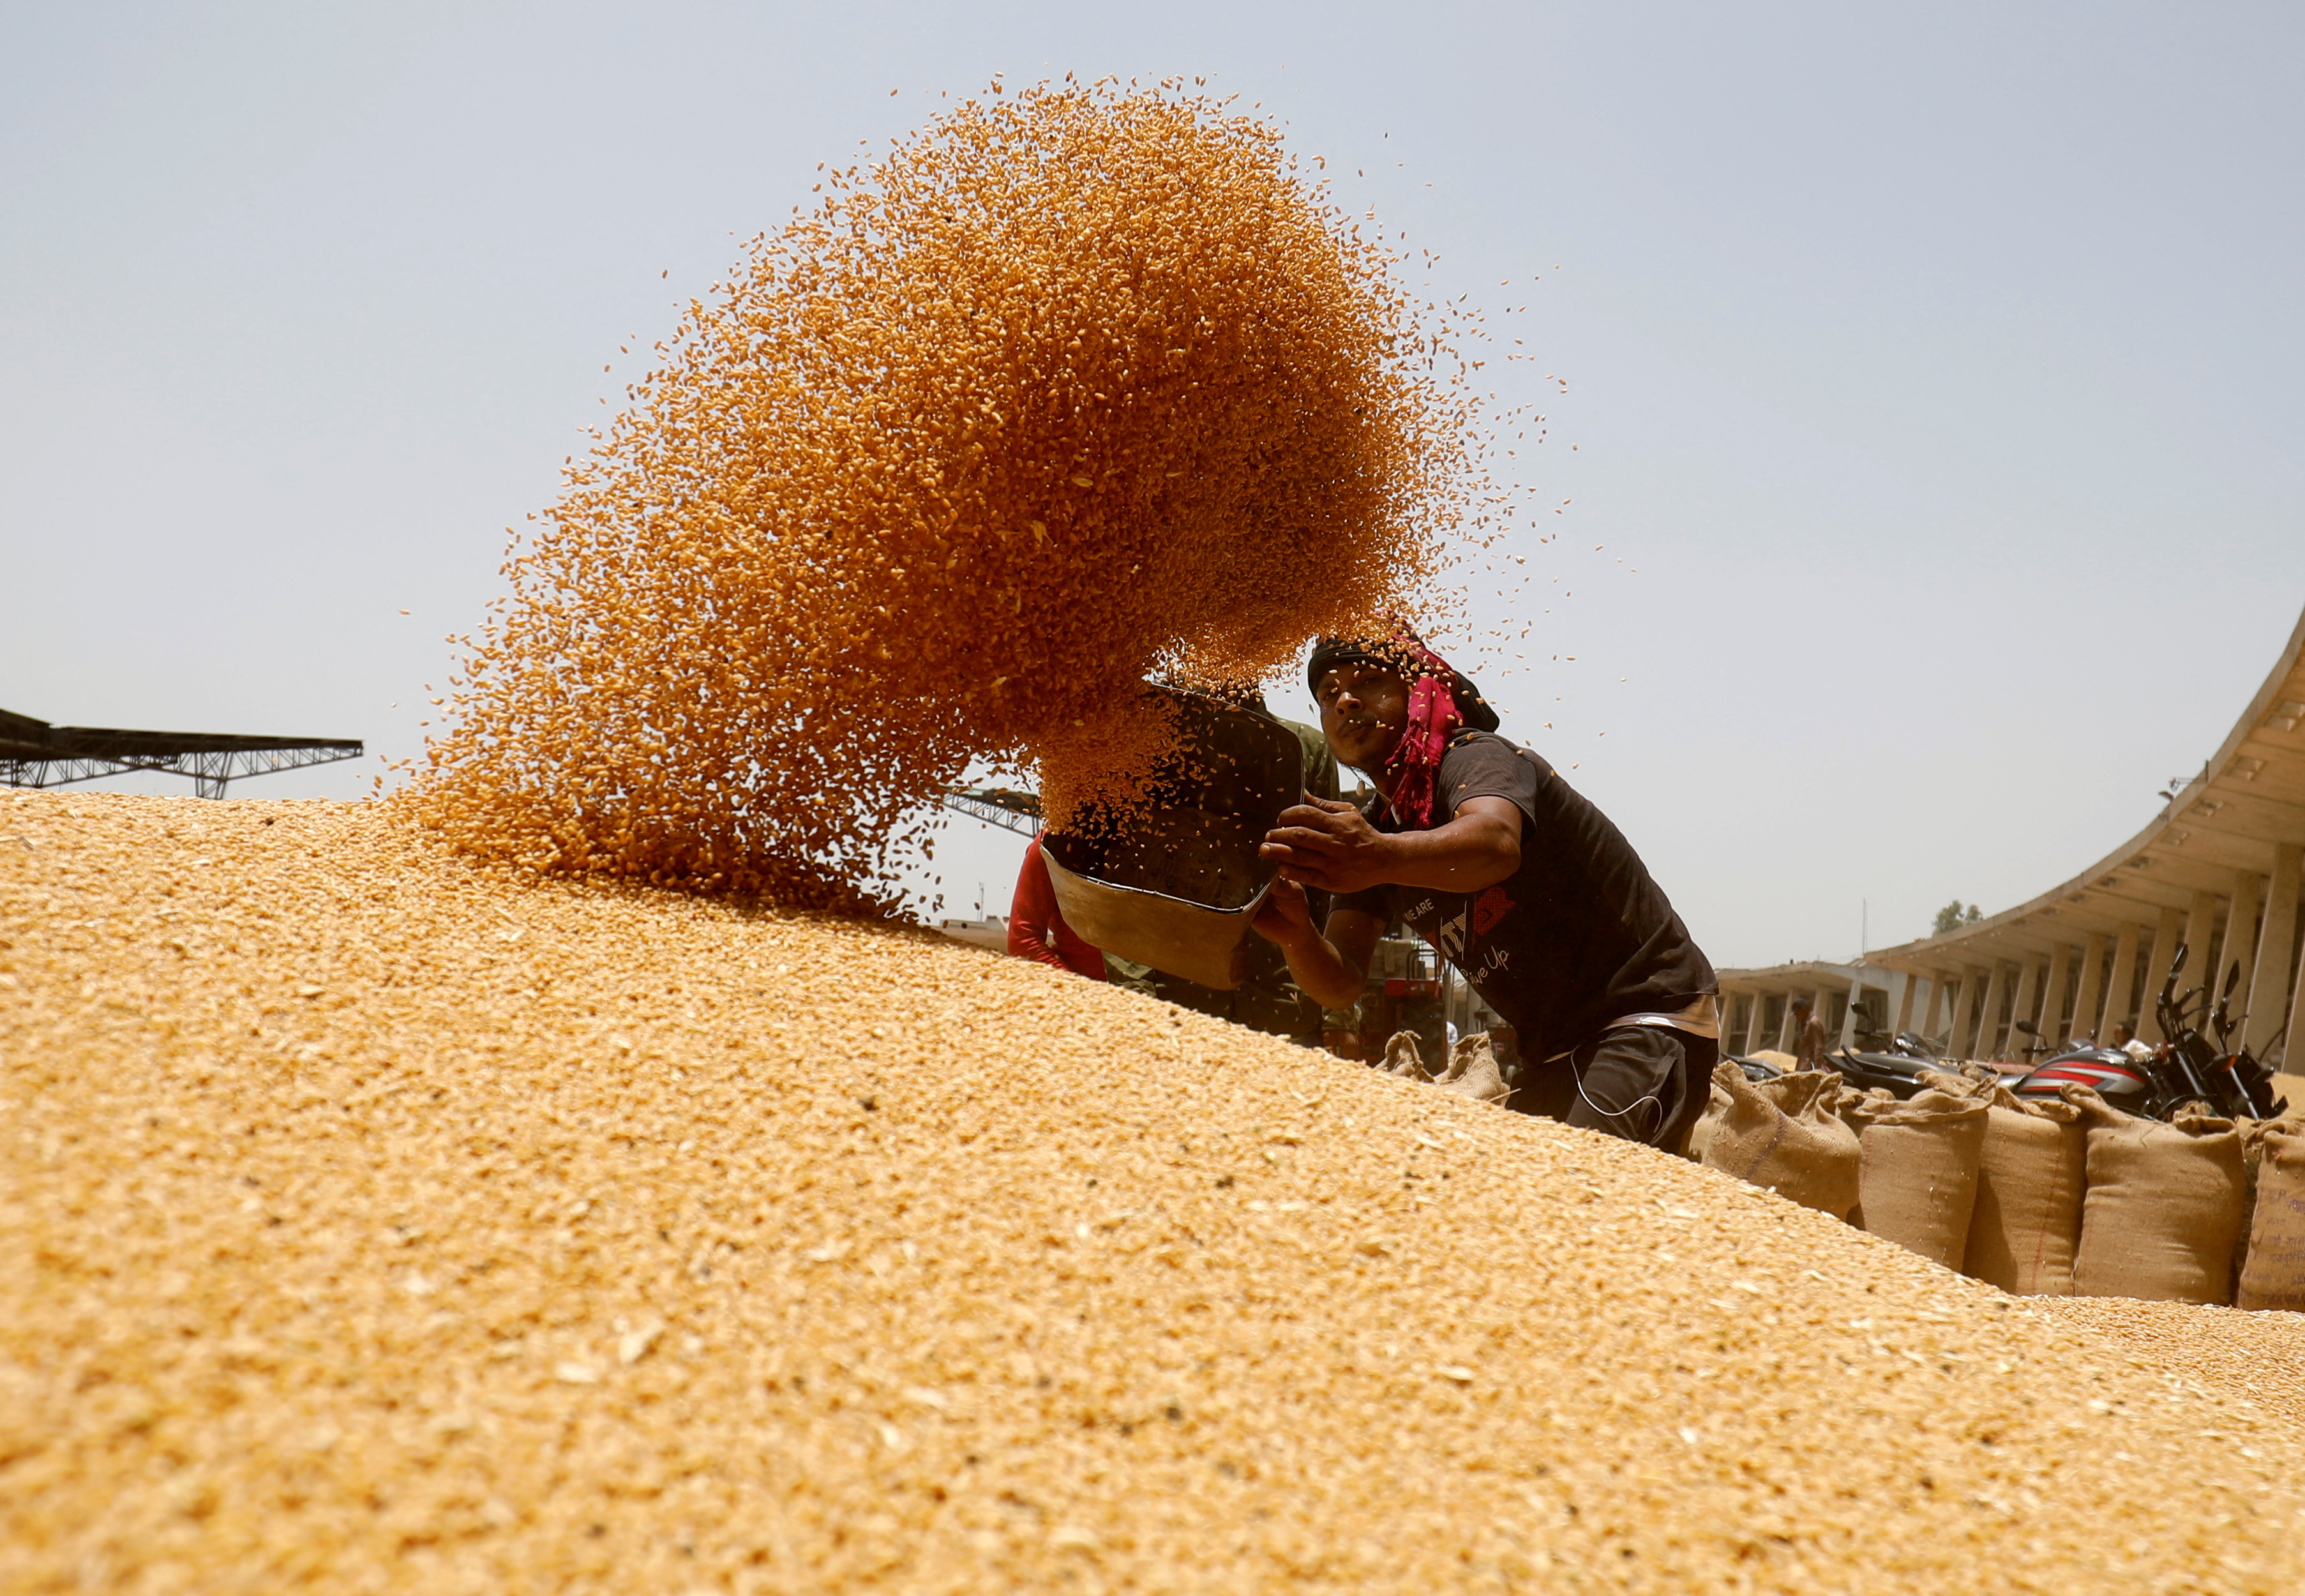 A worker sifts wheat before filling in sacks at a market yard on the outskirts of Ahmedabad